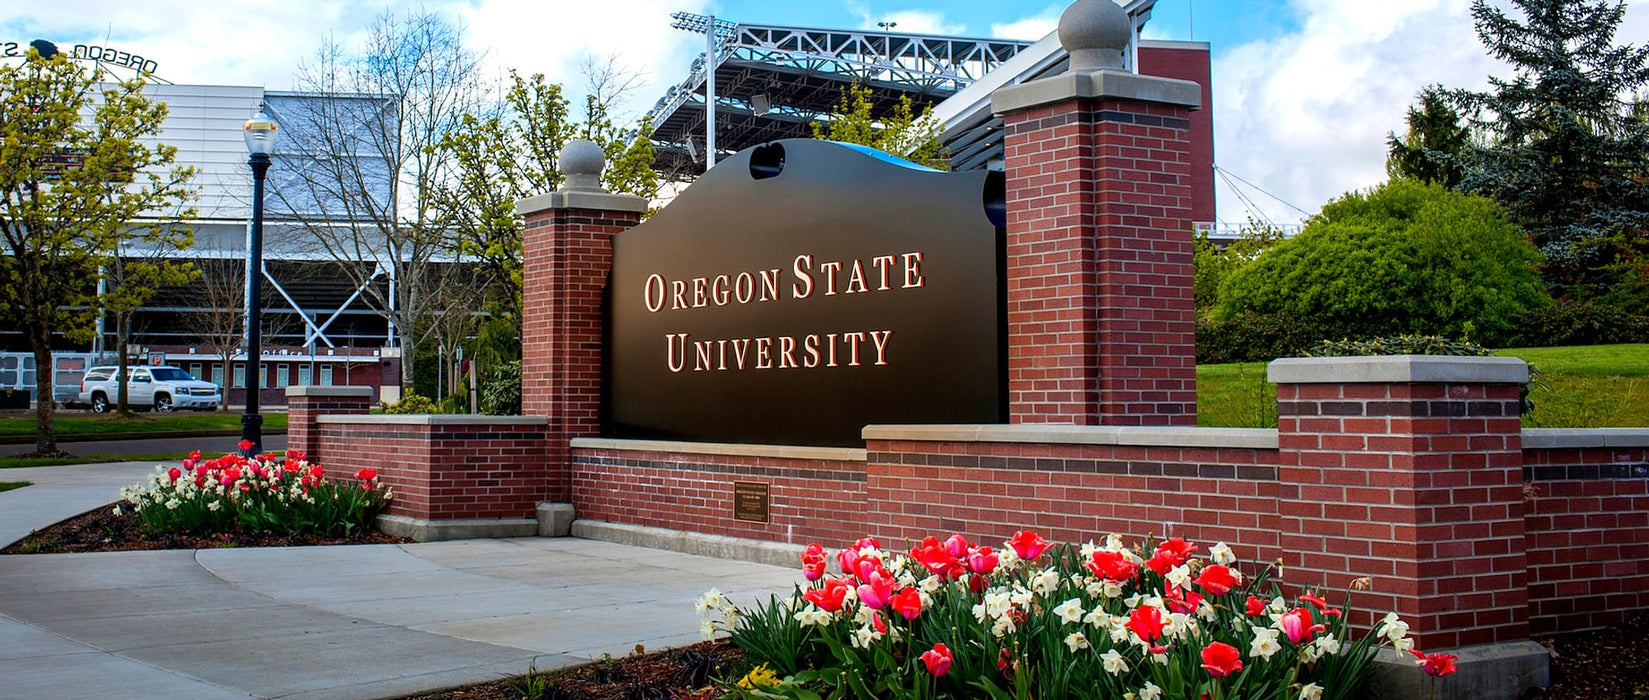 Bachelor of Science - Fisheries and Wildlife Sciences at Oregon State University - Corvallis: Tuition: $32,790.00 USD/year (Scholarship Available)